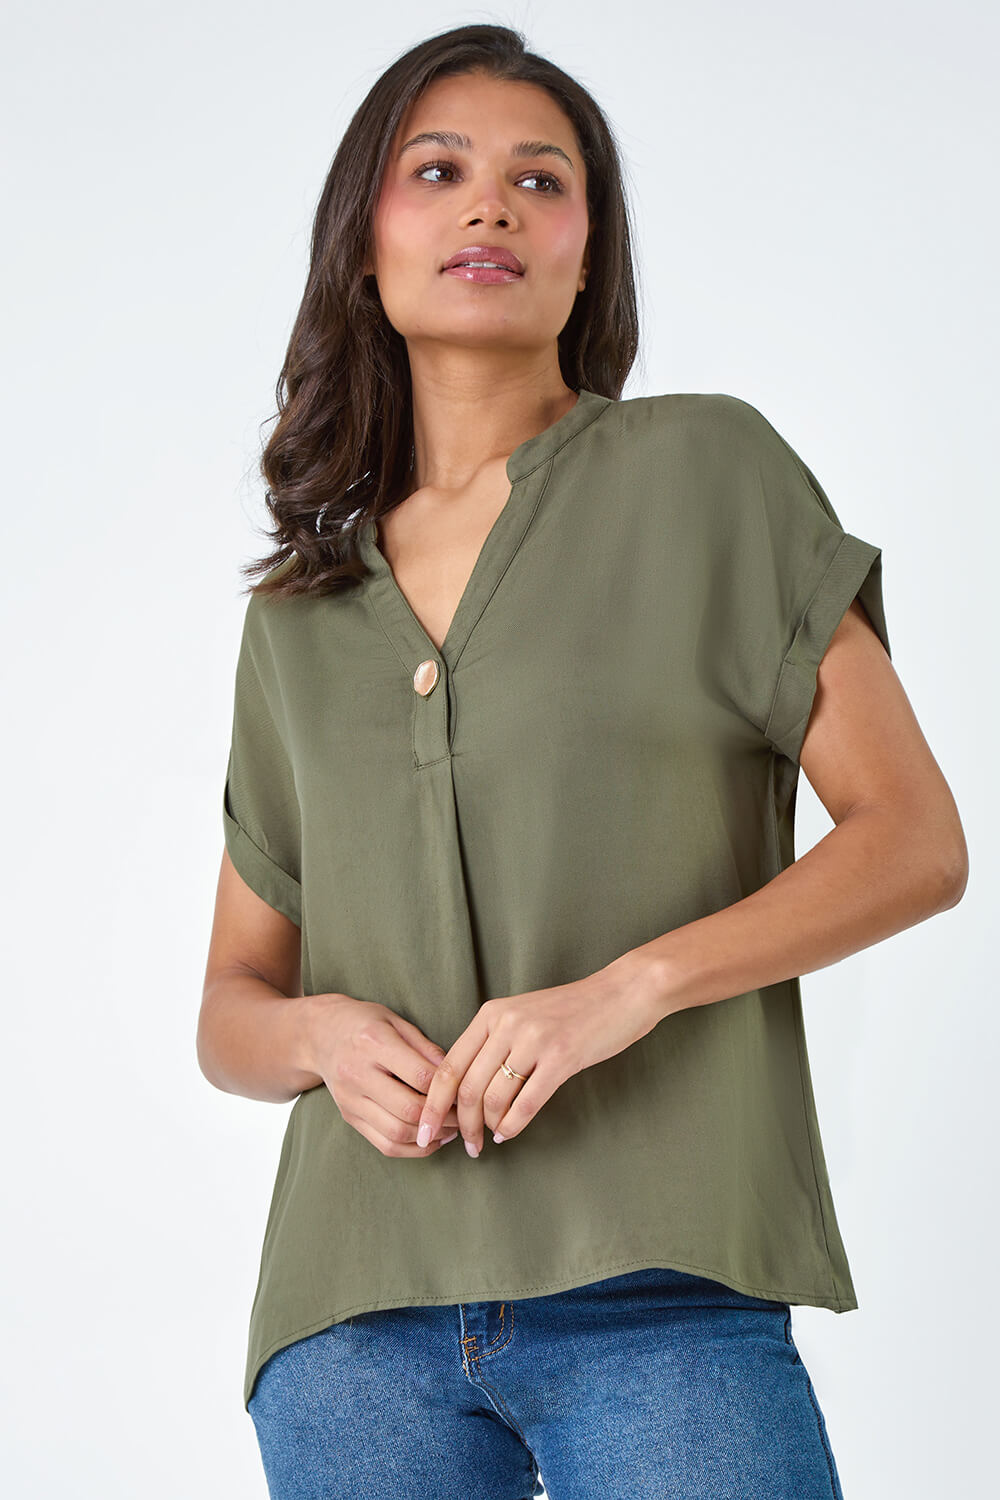 KHAKI Crystal Button Detail Top, Image 4 of 5